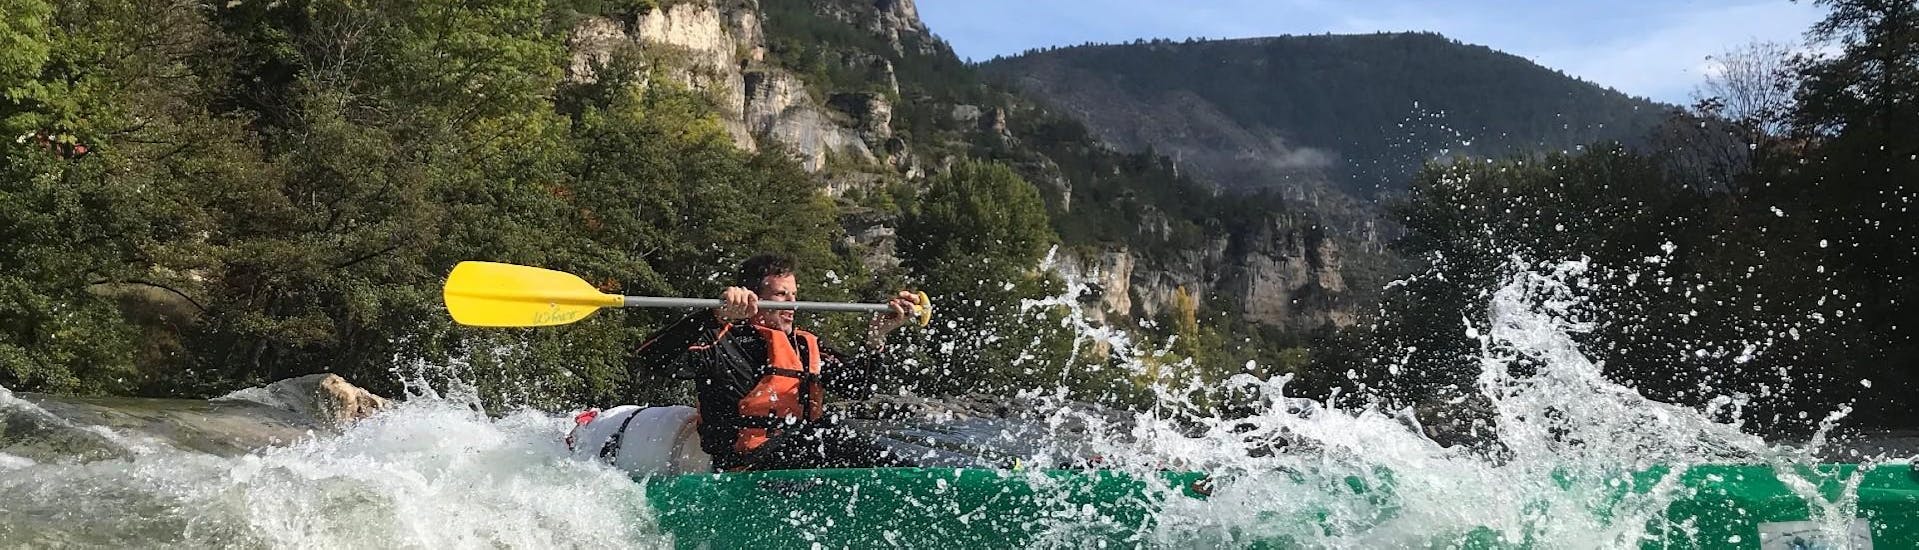 A man is paddling activly in the heart of the Gorges during the sportive tour of 20 km Canoe Rental on the Tarn with Canoe La Cazelle Gorges du Tarn.